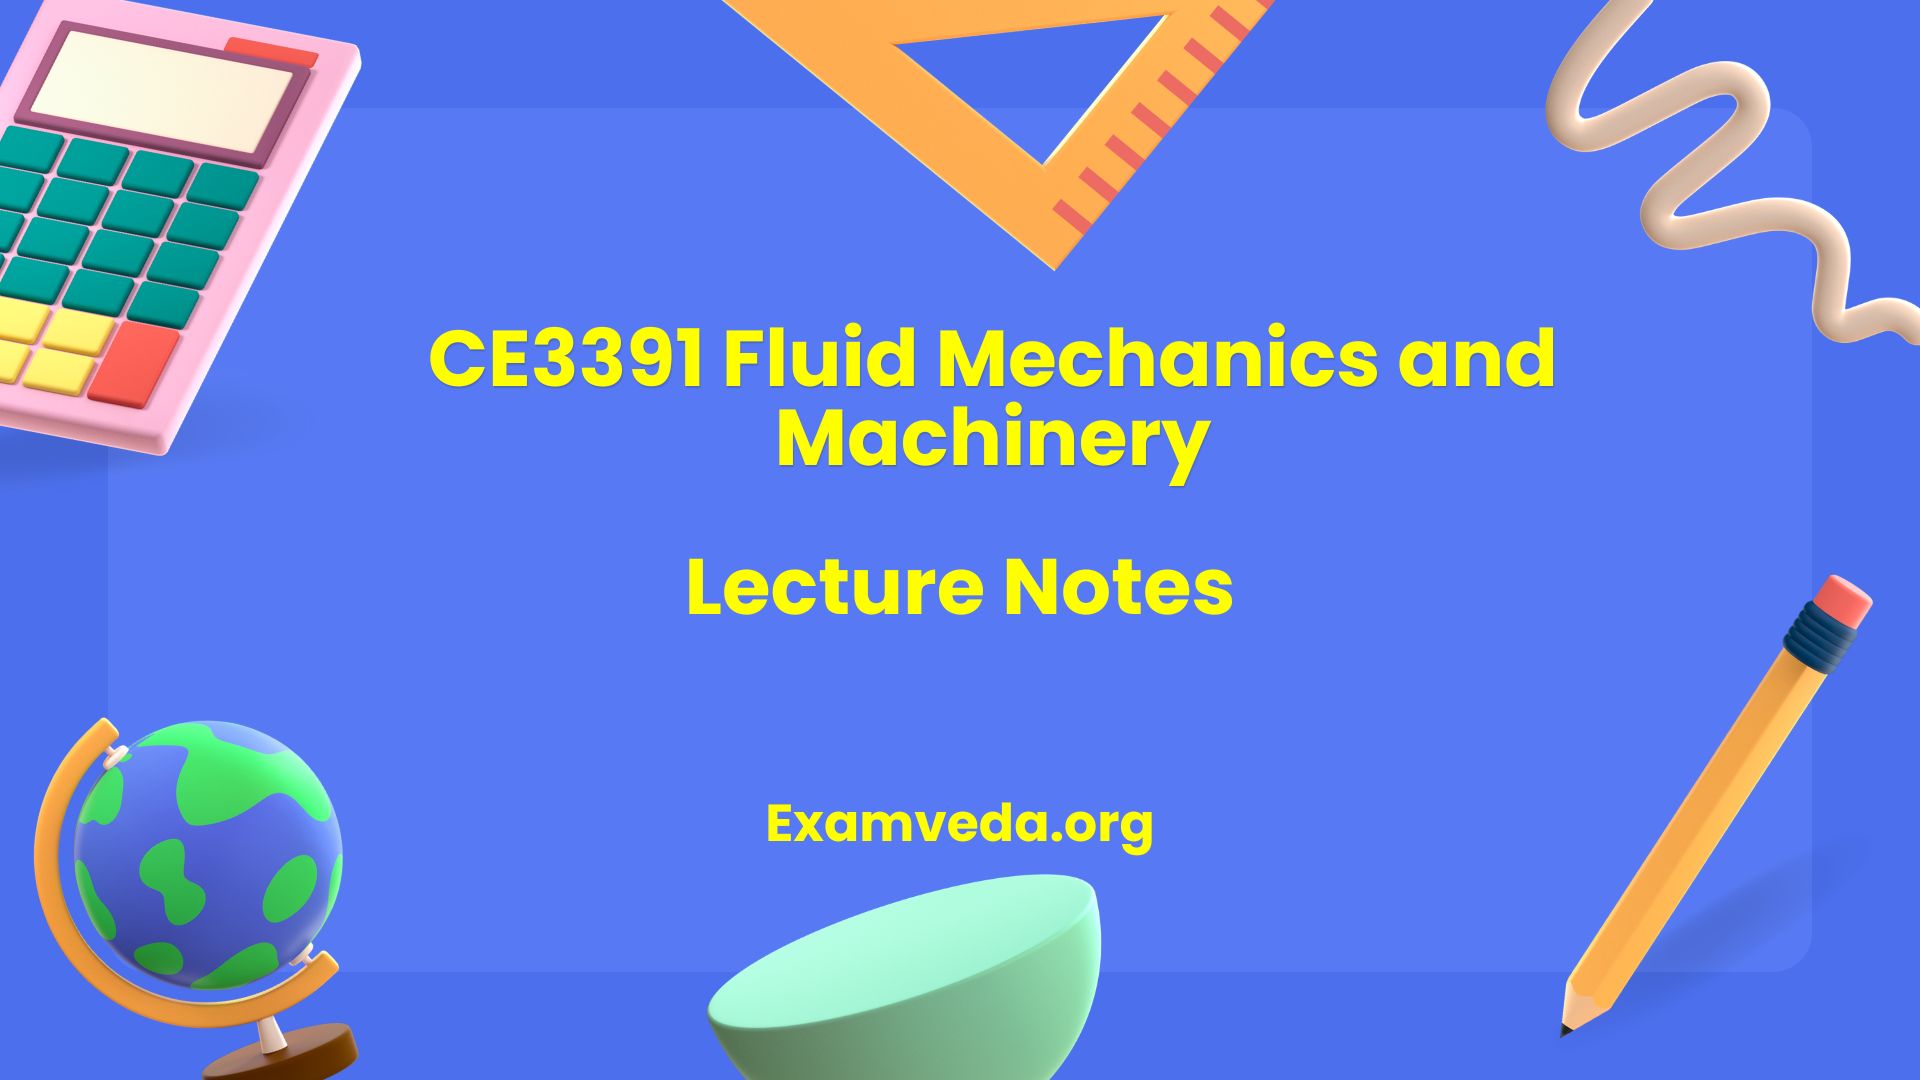 CE3391 Fluid Mechanics and Machinery Lecture Notes